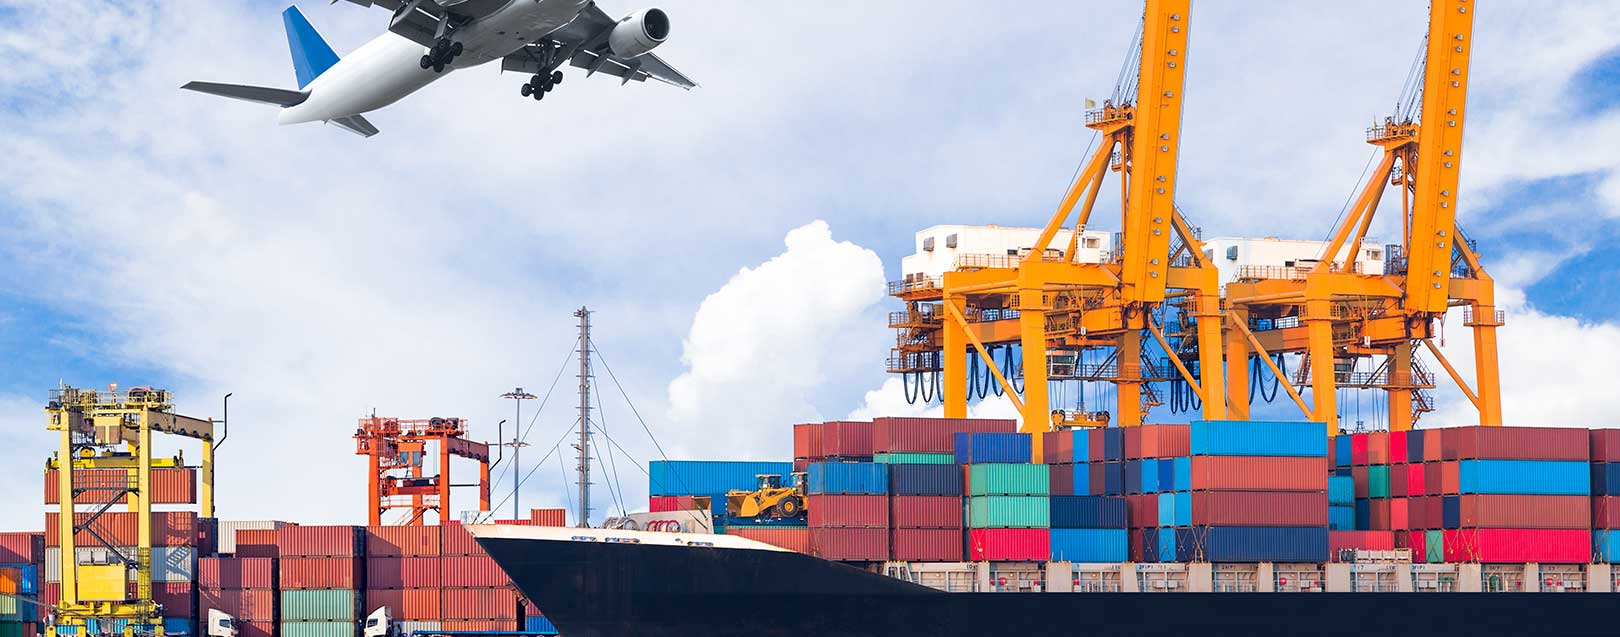 Exports from SEZs grew 18% in February 2018